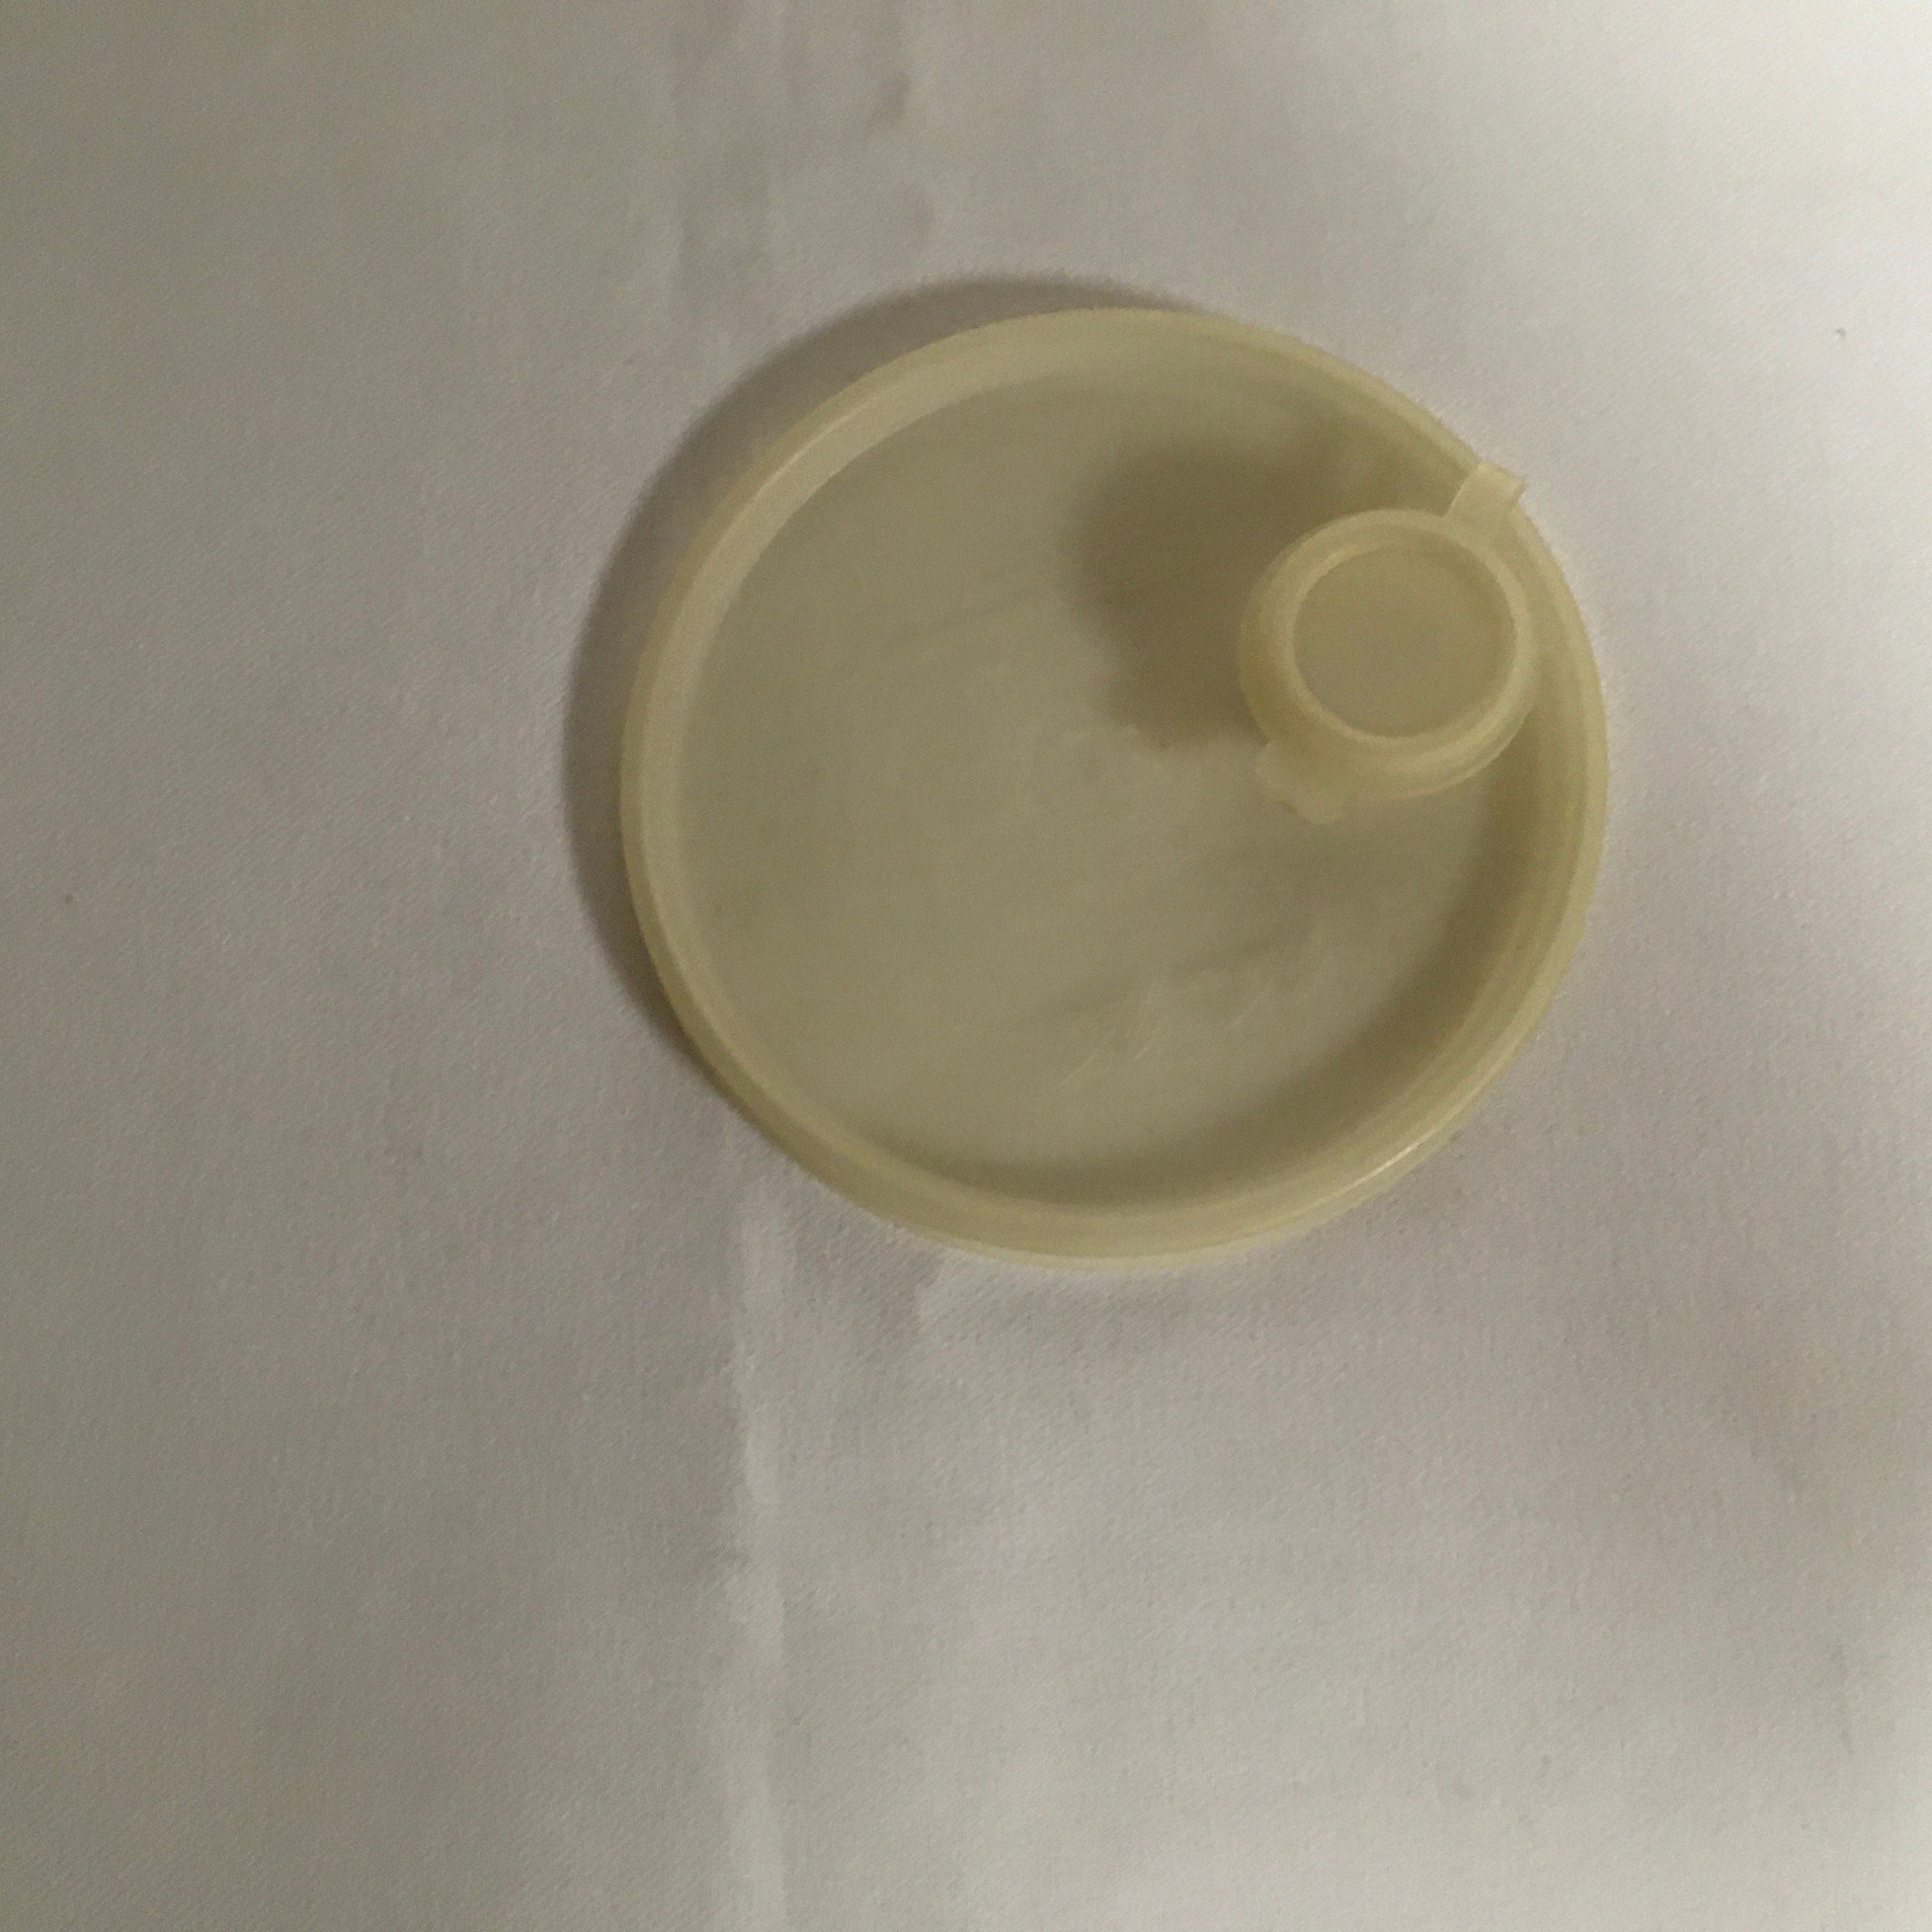 Vintage Tupperware Replacement Lid Seal Lids Seals YOU CHOOSE FREE SHIPPING